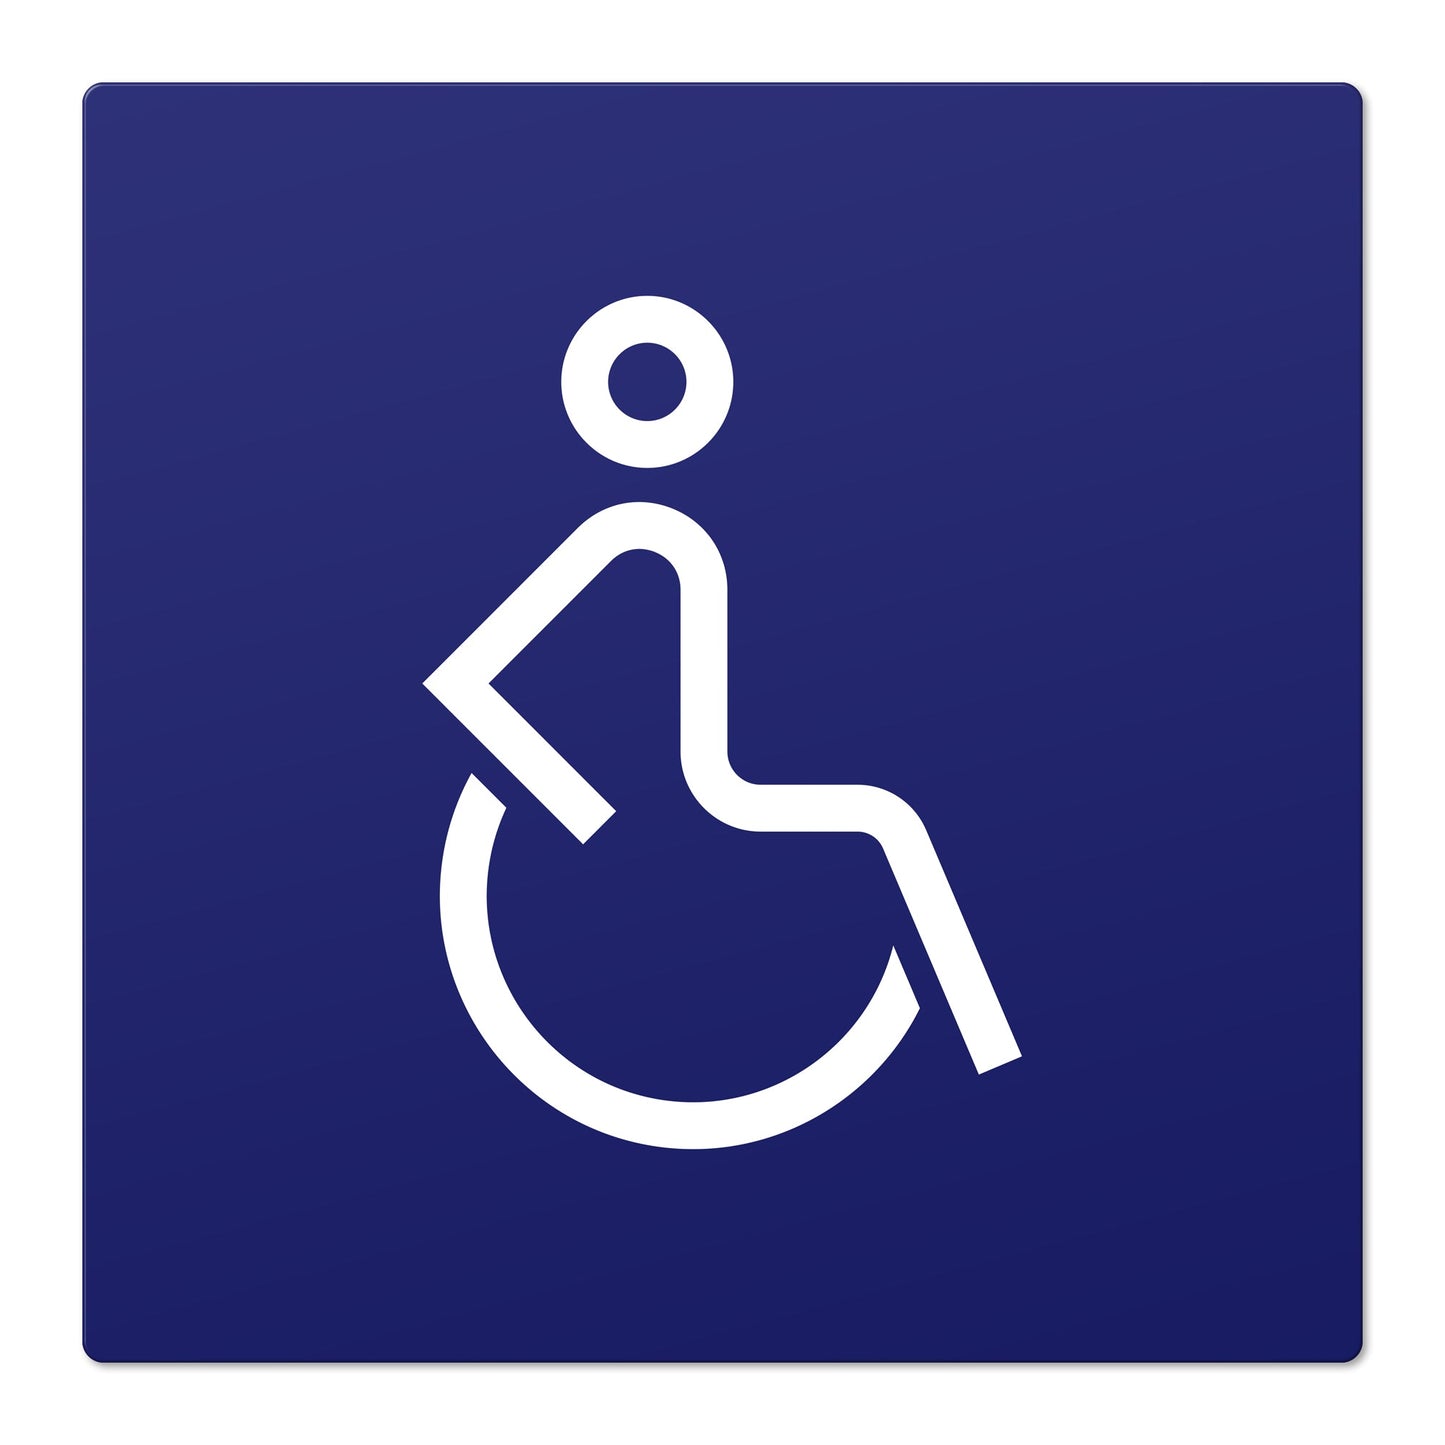 Accessible (Pictogram)